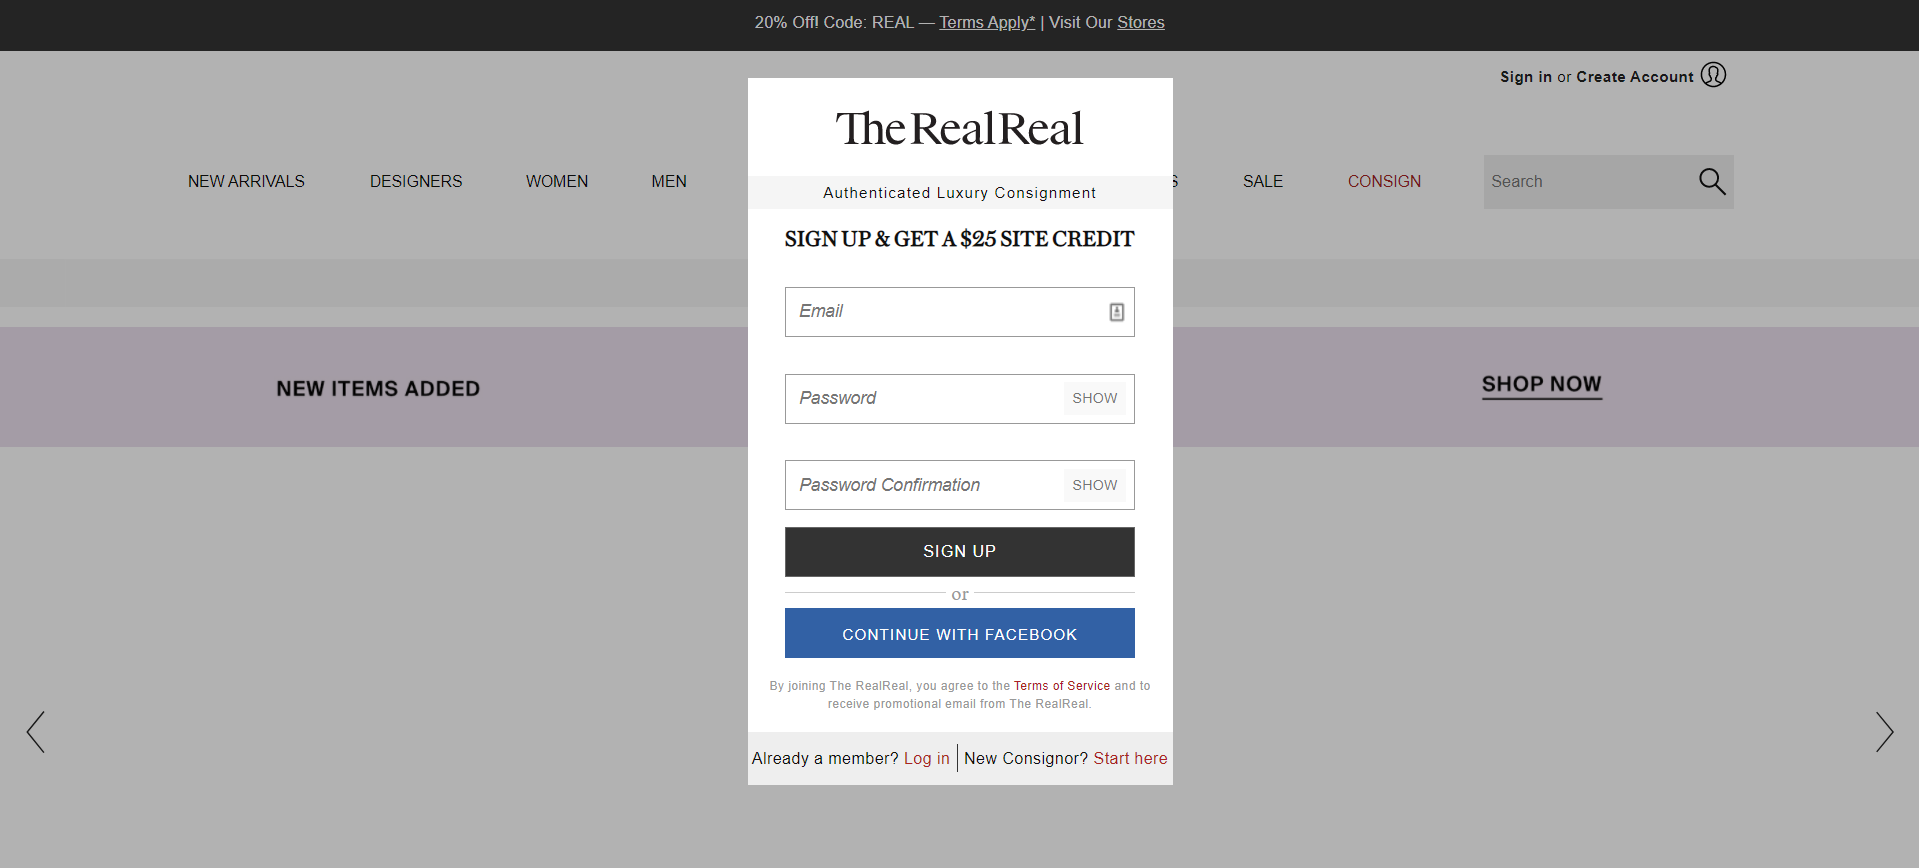 TheRealReal signup popup